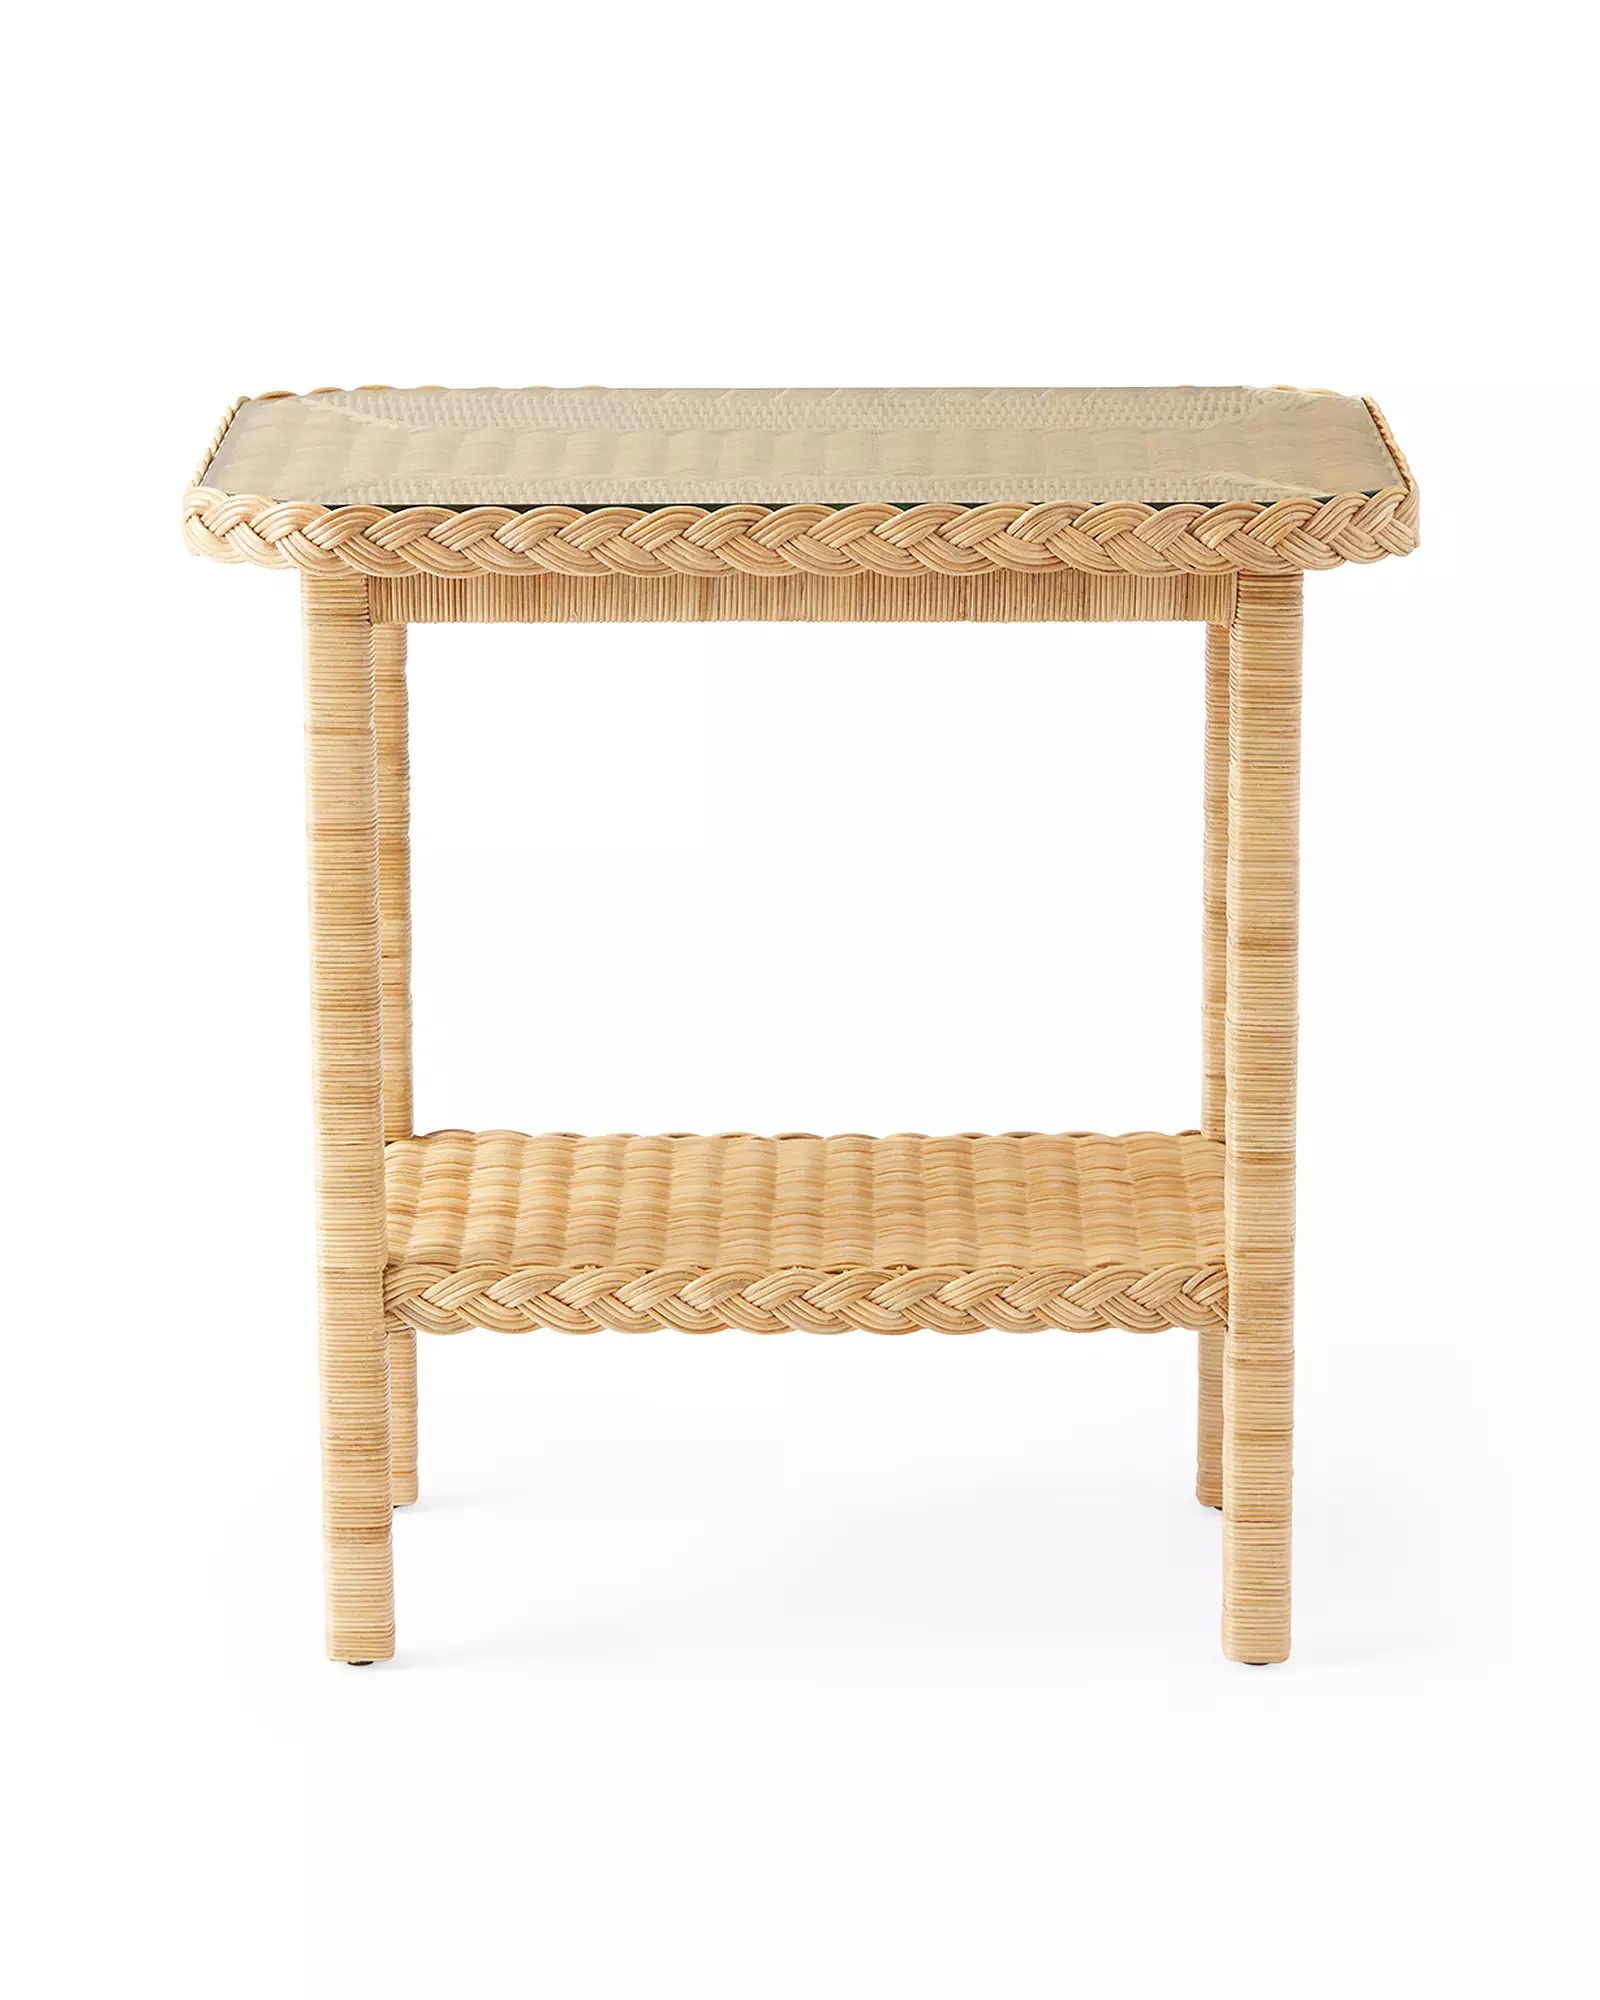 Hammonds Side Table | Serena and Lily